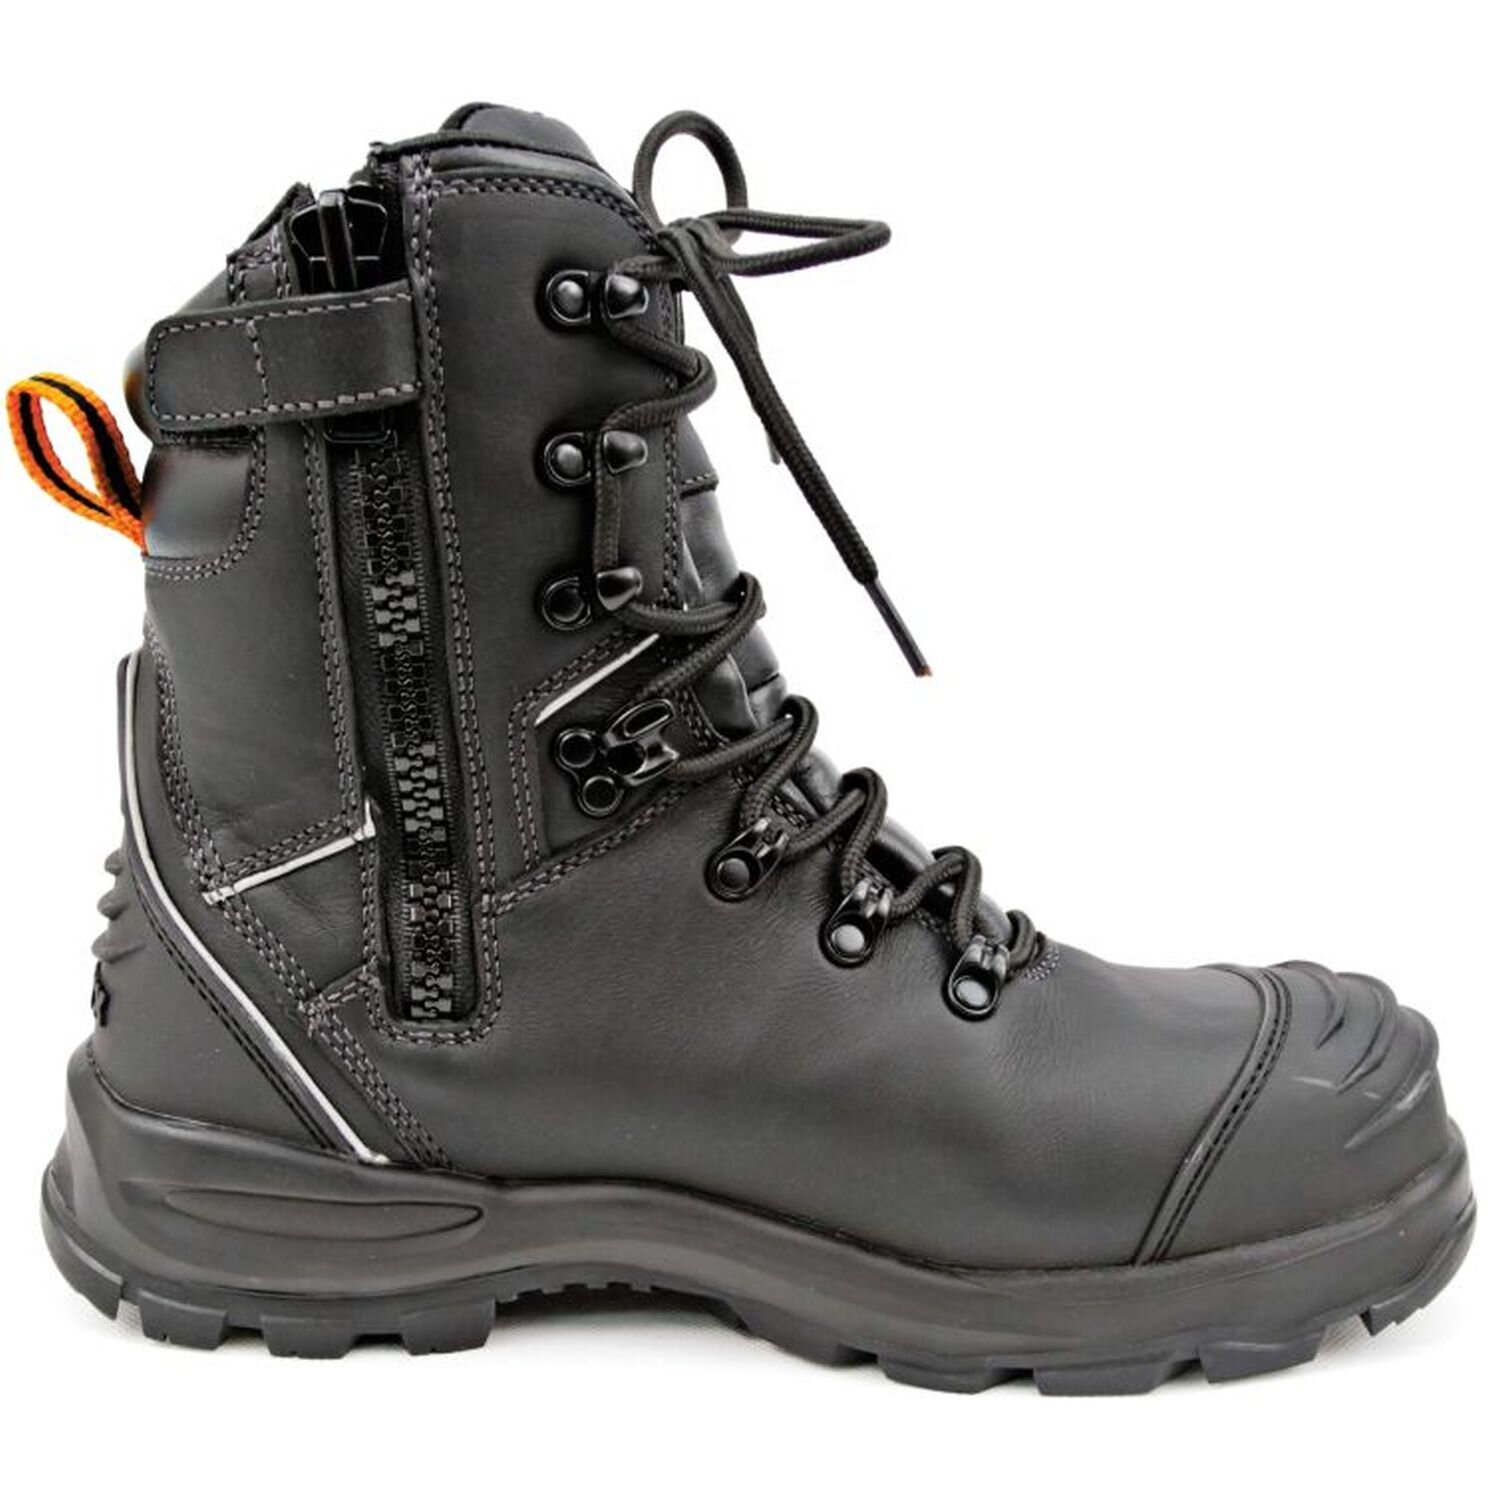 Bison Extreme Lace Up/Zip Safety Boot with Scuff Cap Black